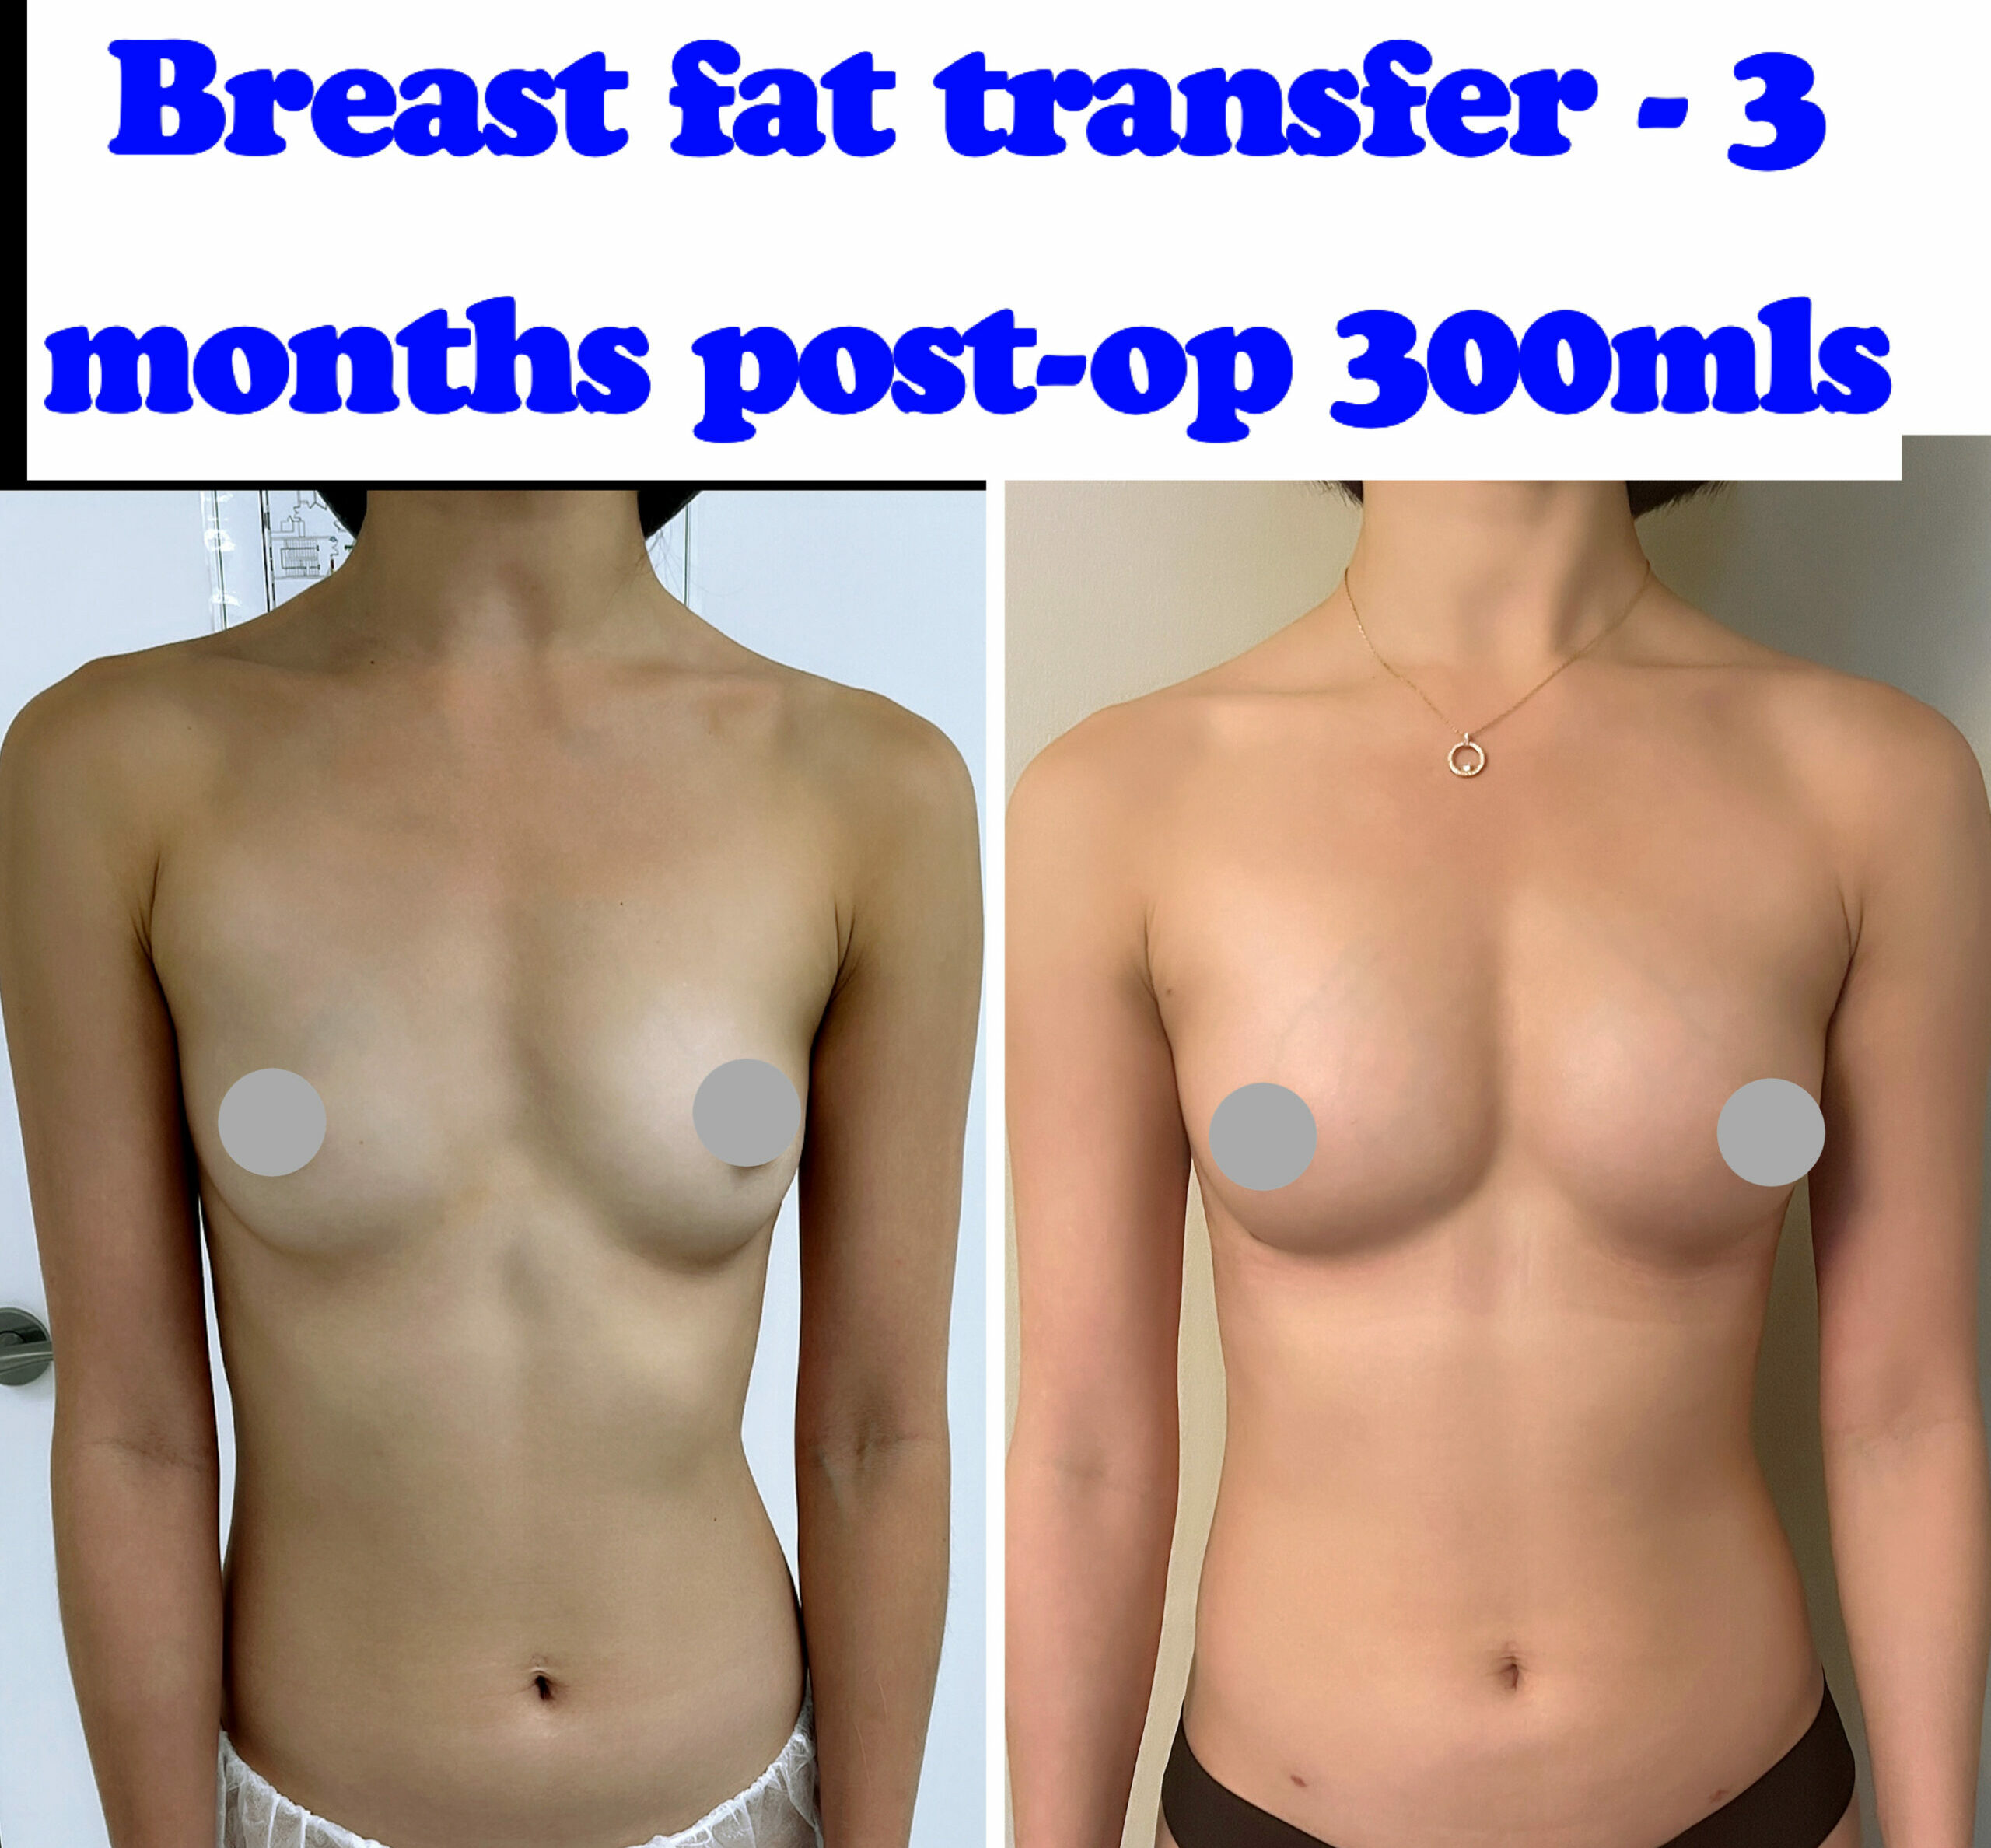 Fat transfer breast augmentation small breasts before after photos at Harley Clinic in London, UK